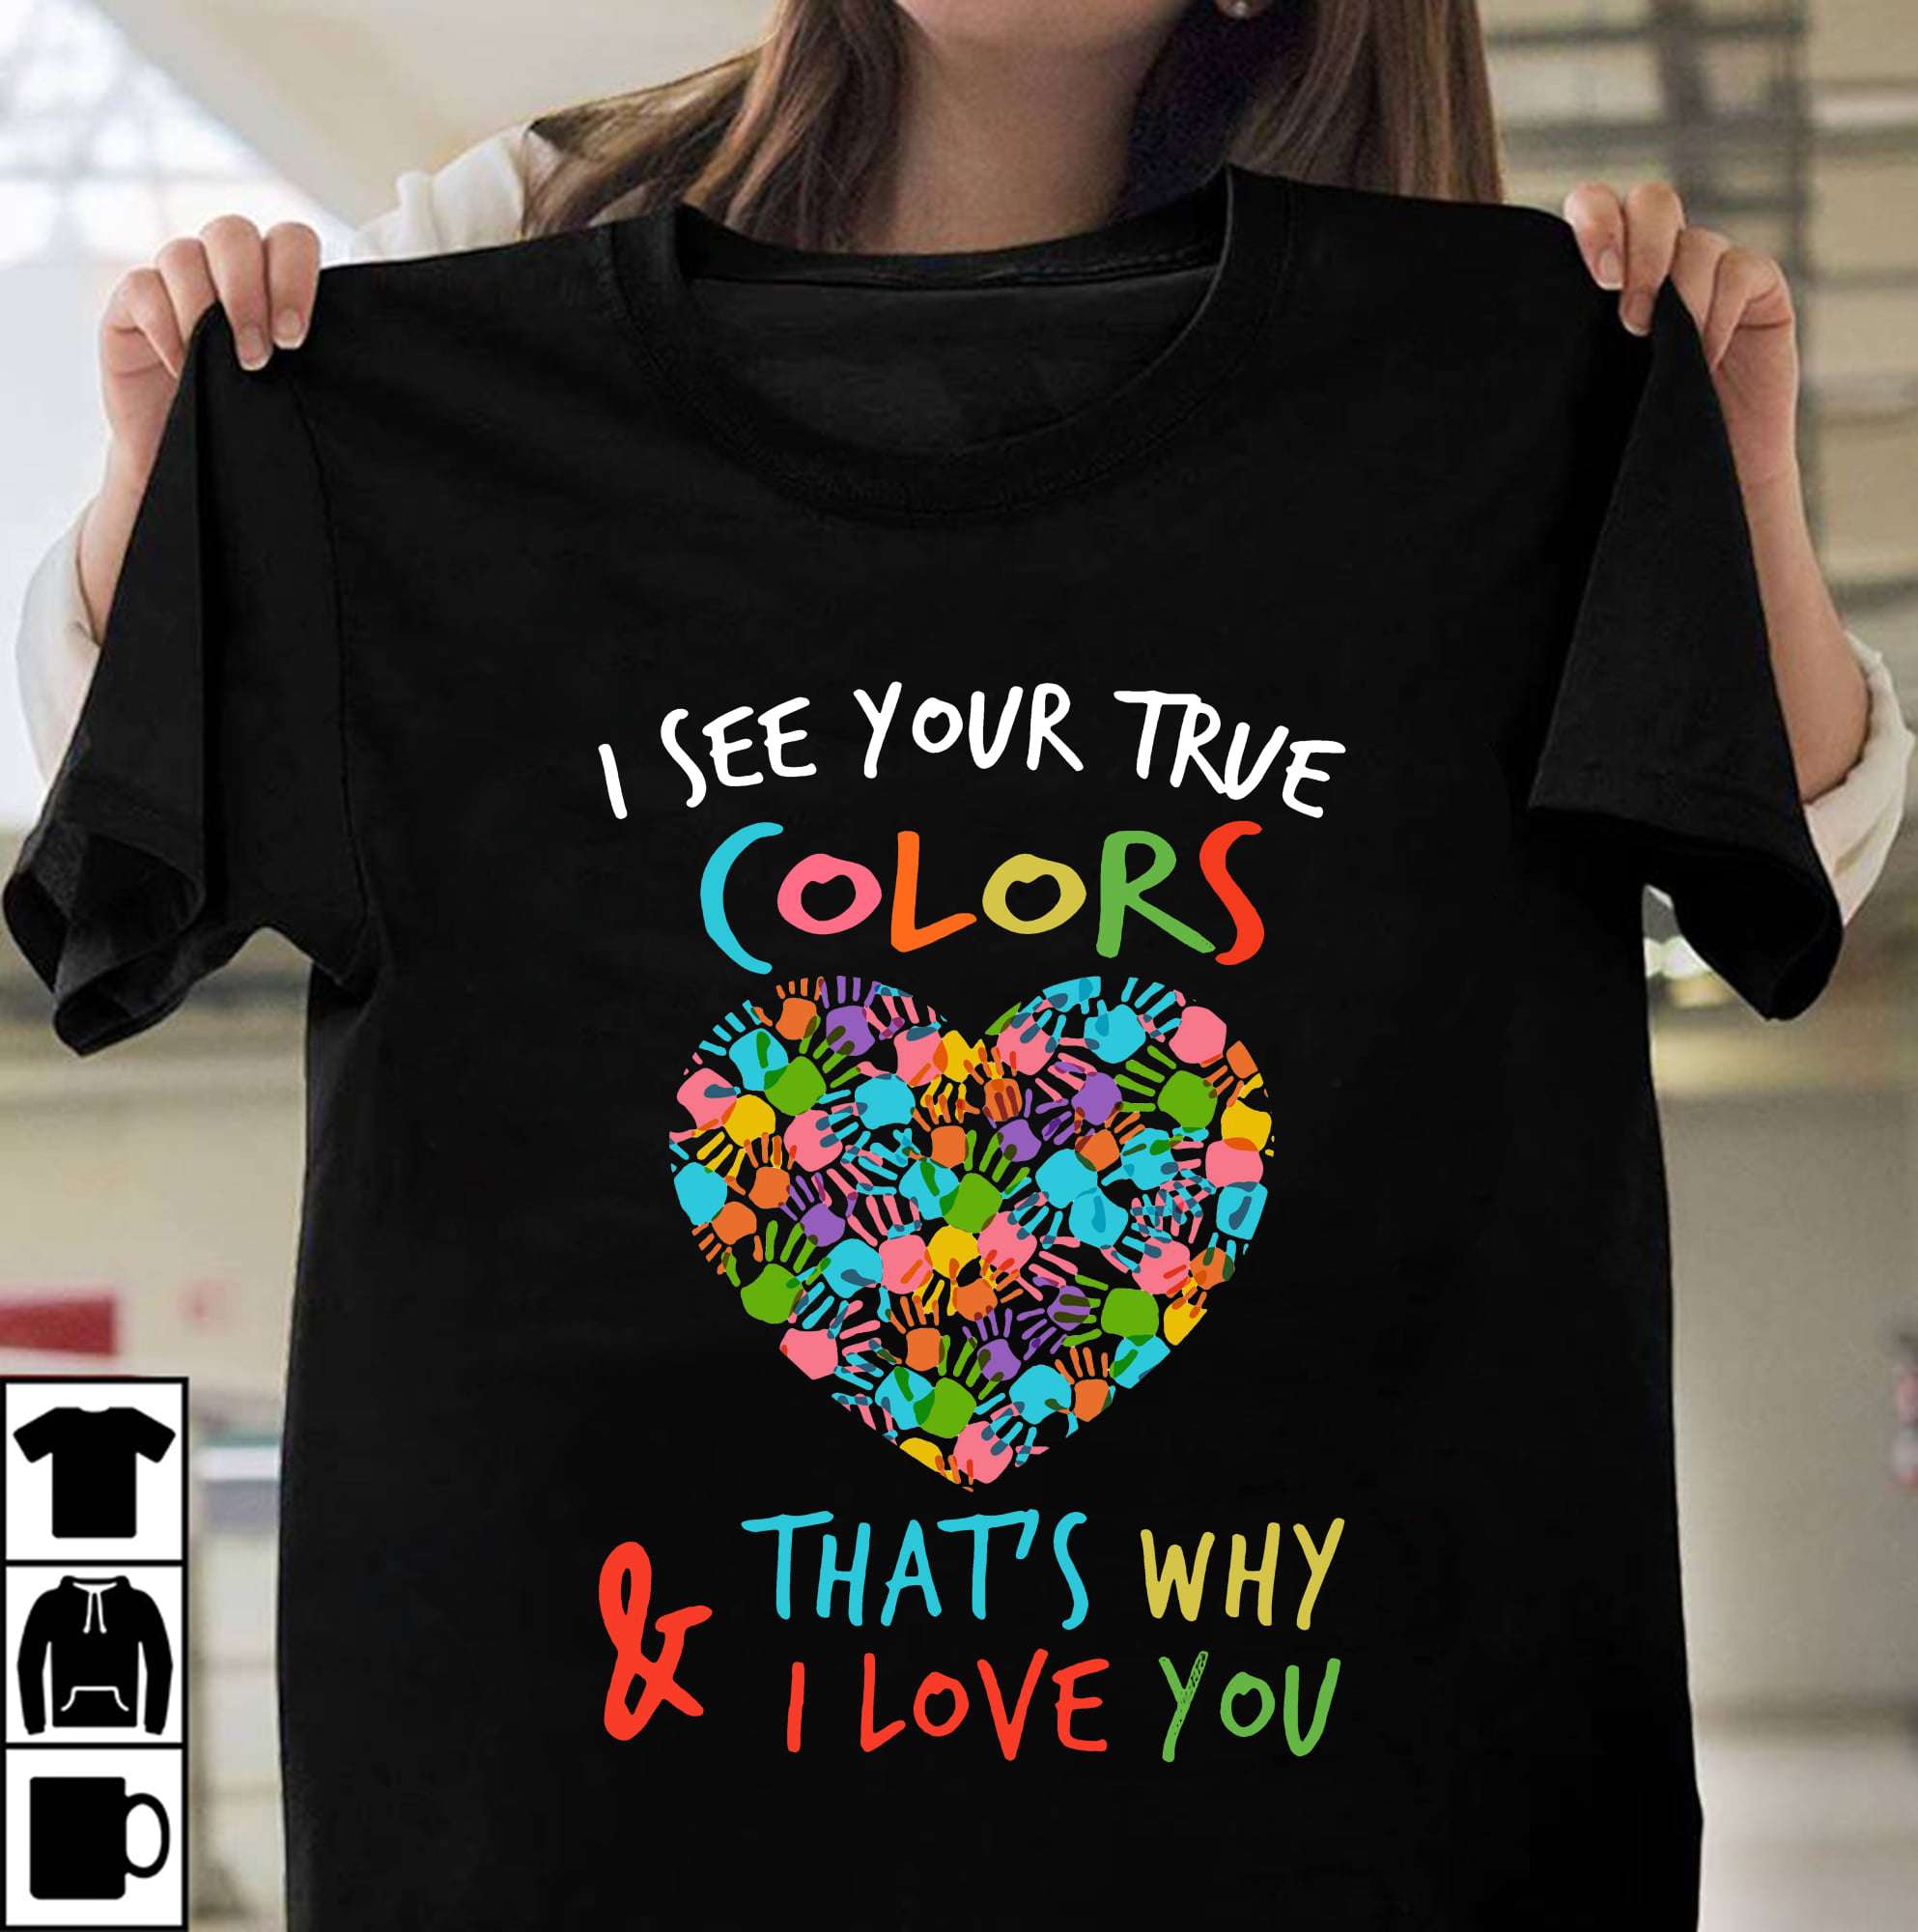 I see your true colors that's why I love you - little hands community, the true color of people